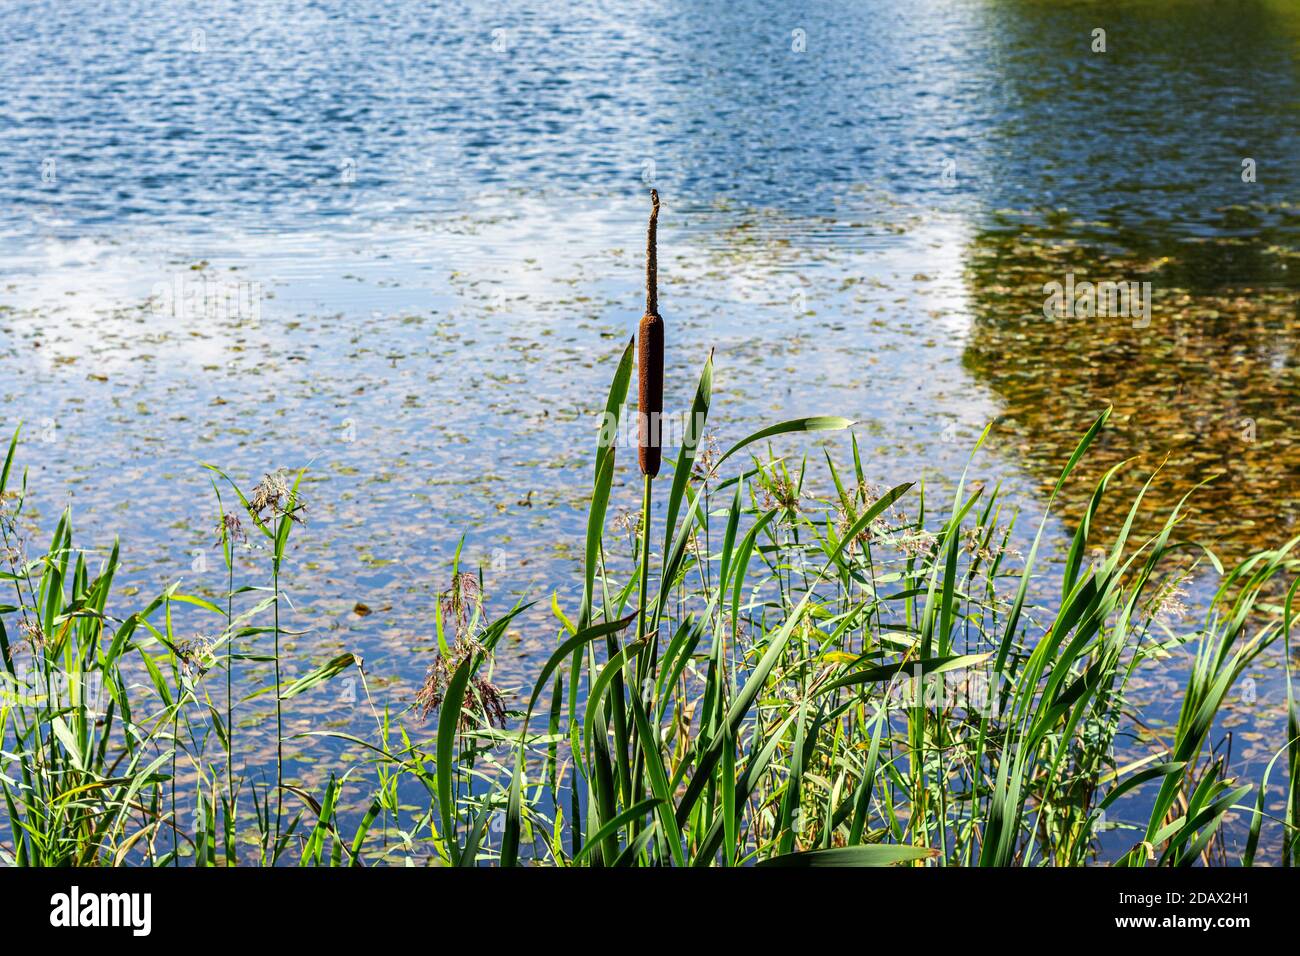 Lonely reeds growing among sedge on the Bank of the pond against the blue water. Stock Photo